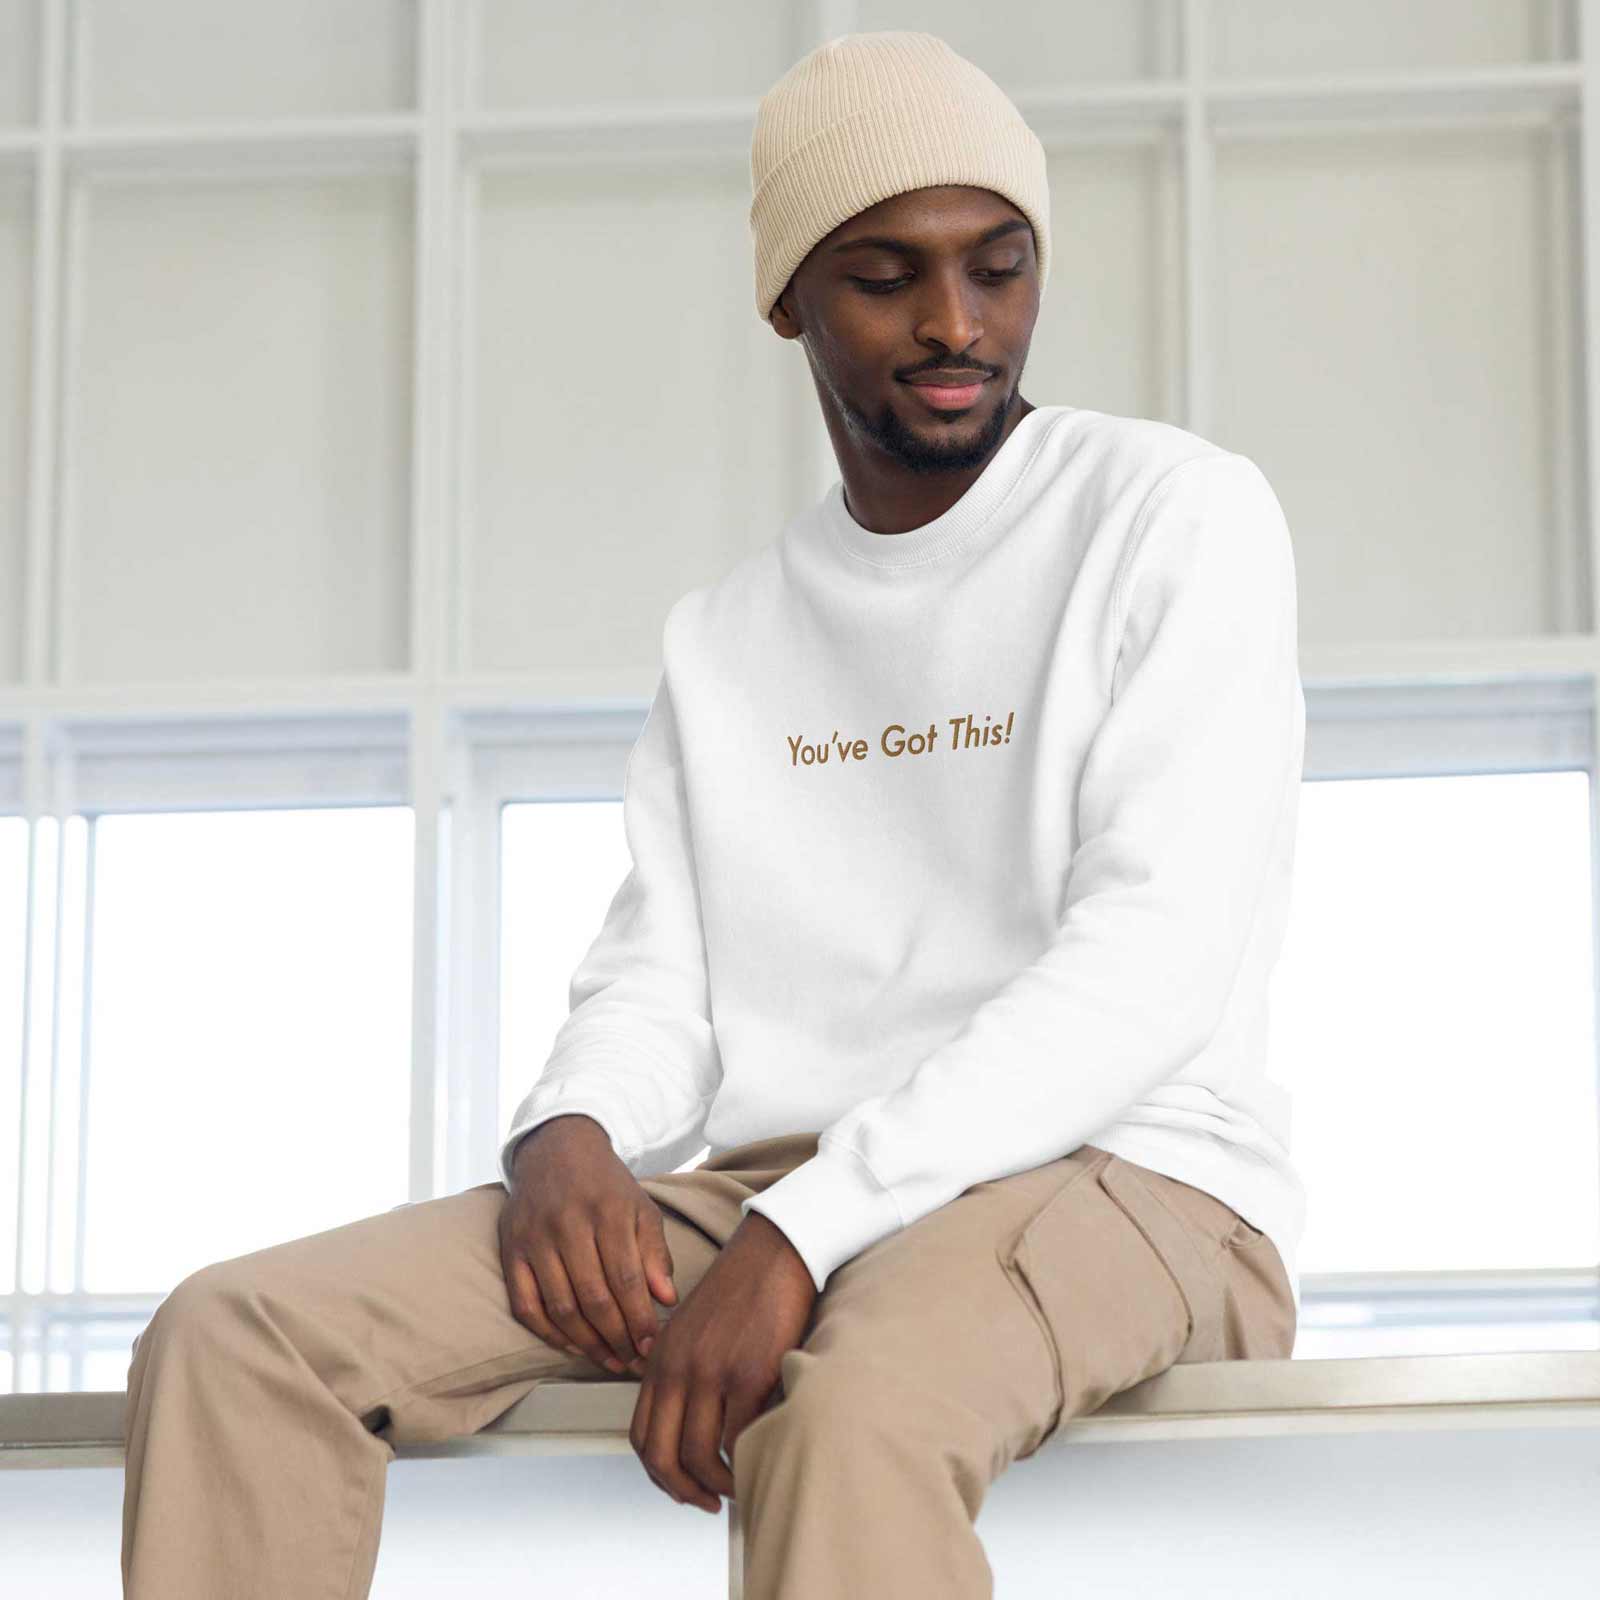 Man wearing a "You've Got This!" white sweatshirt with beanie and khaki